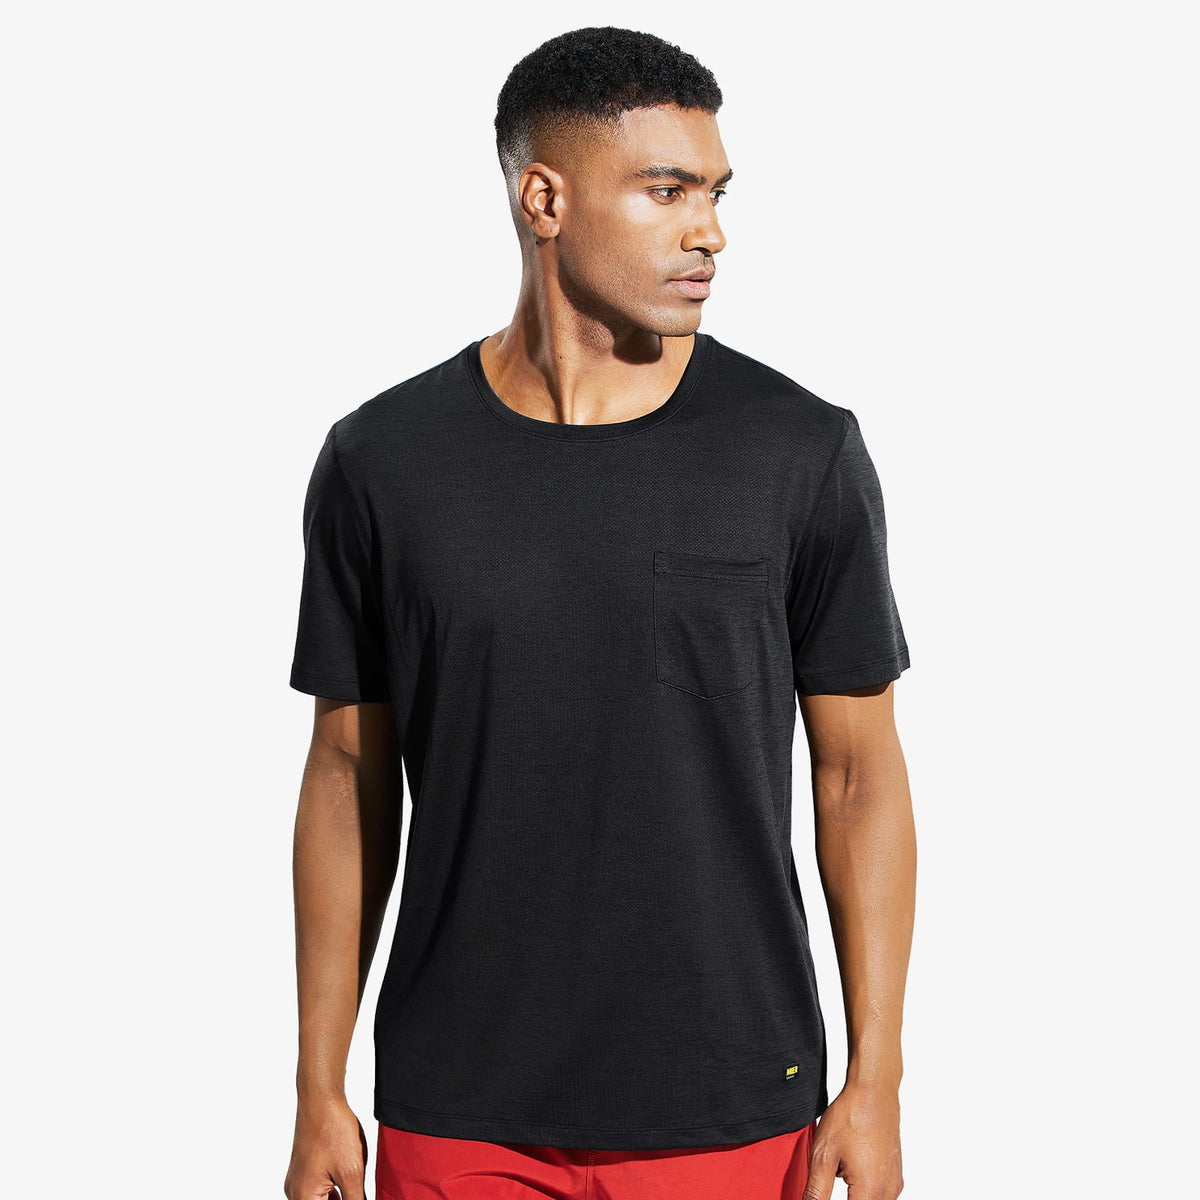 Men's Dry Fit Athletic T-Shirt with Pocket, Black / S